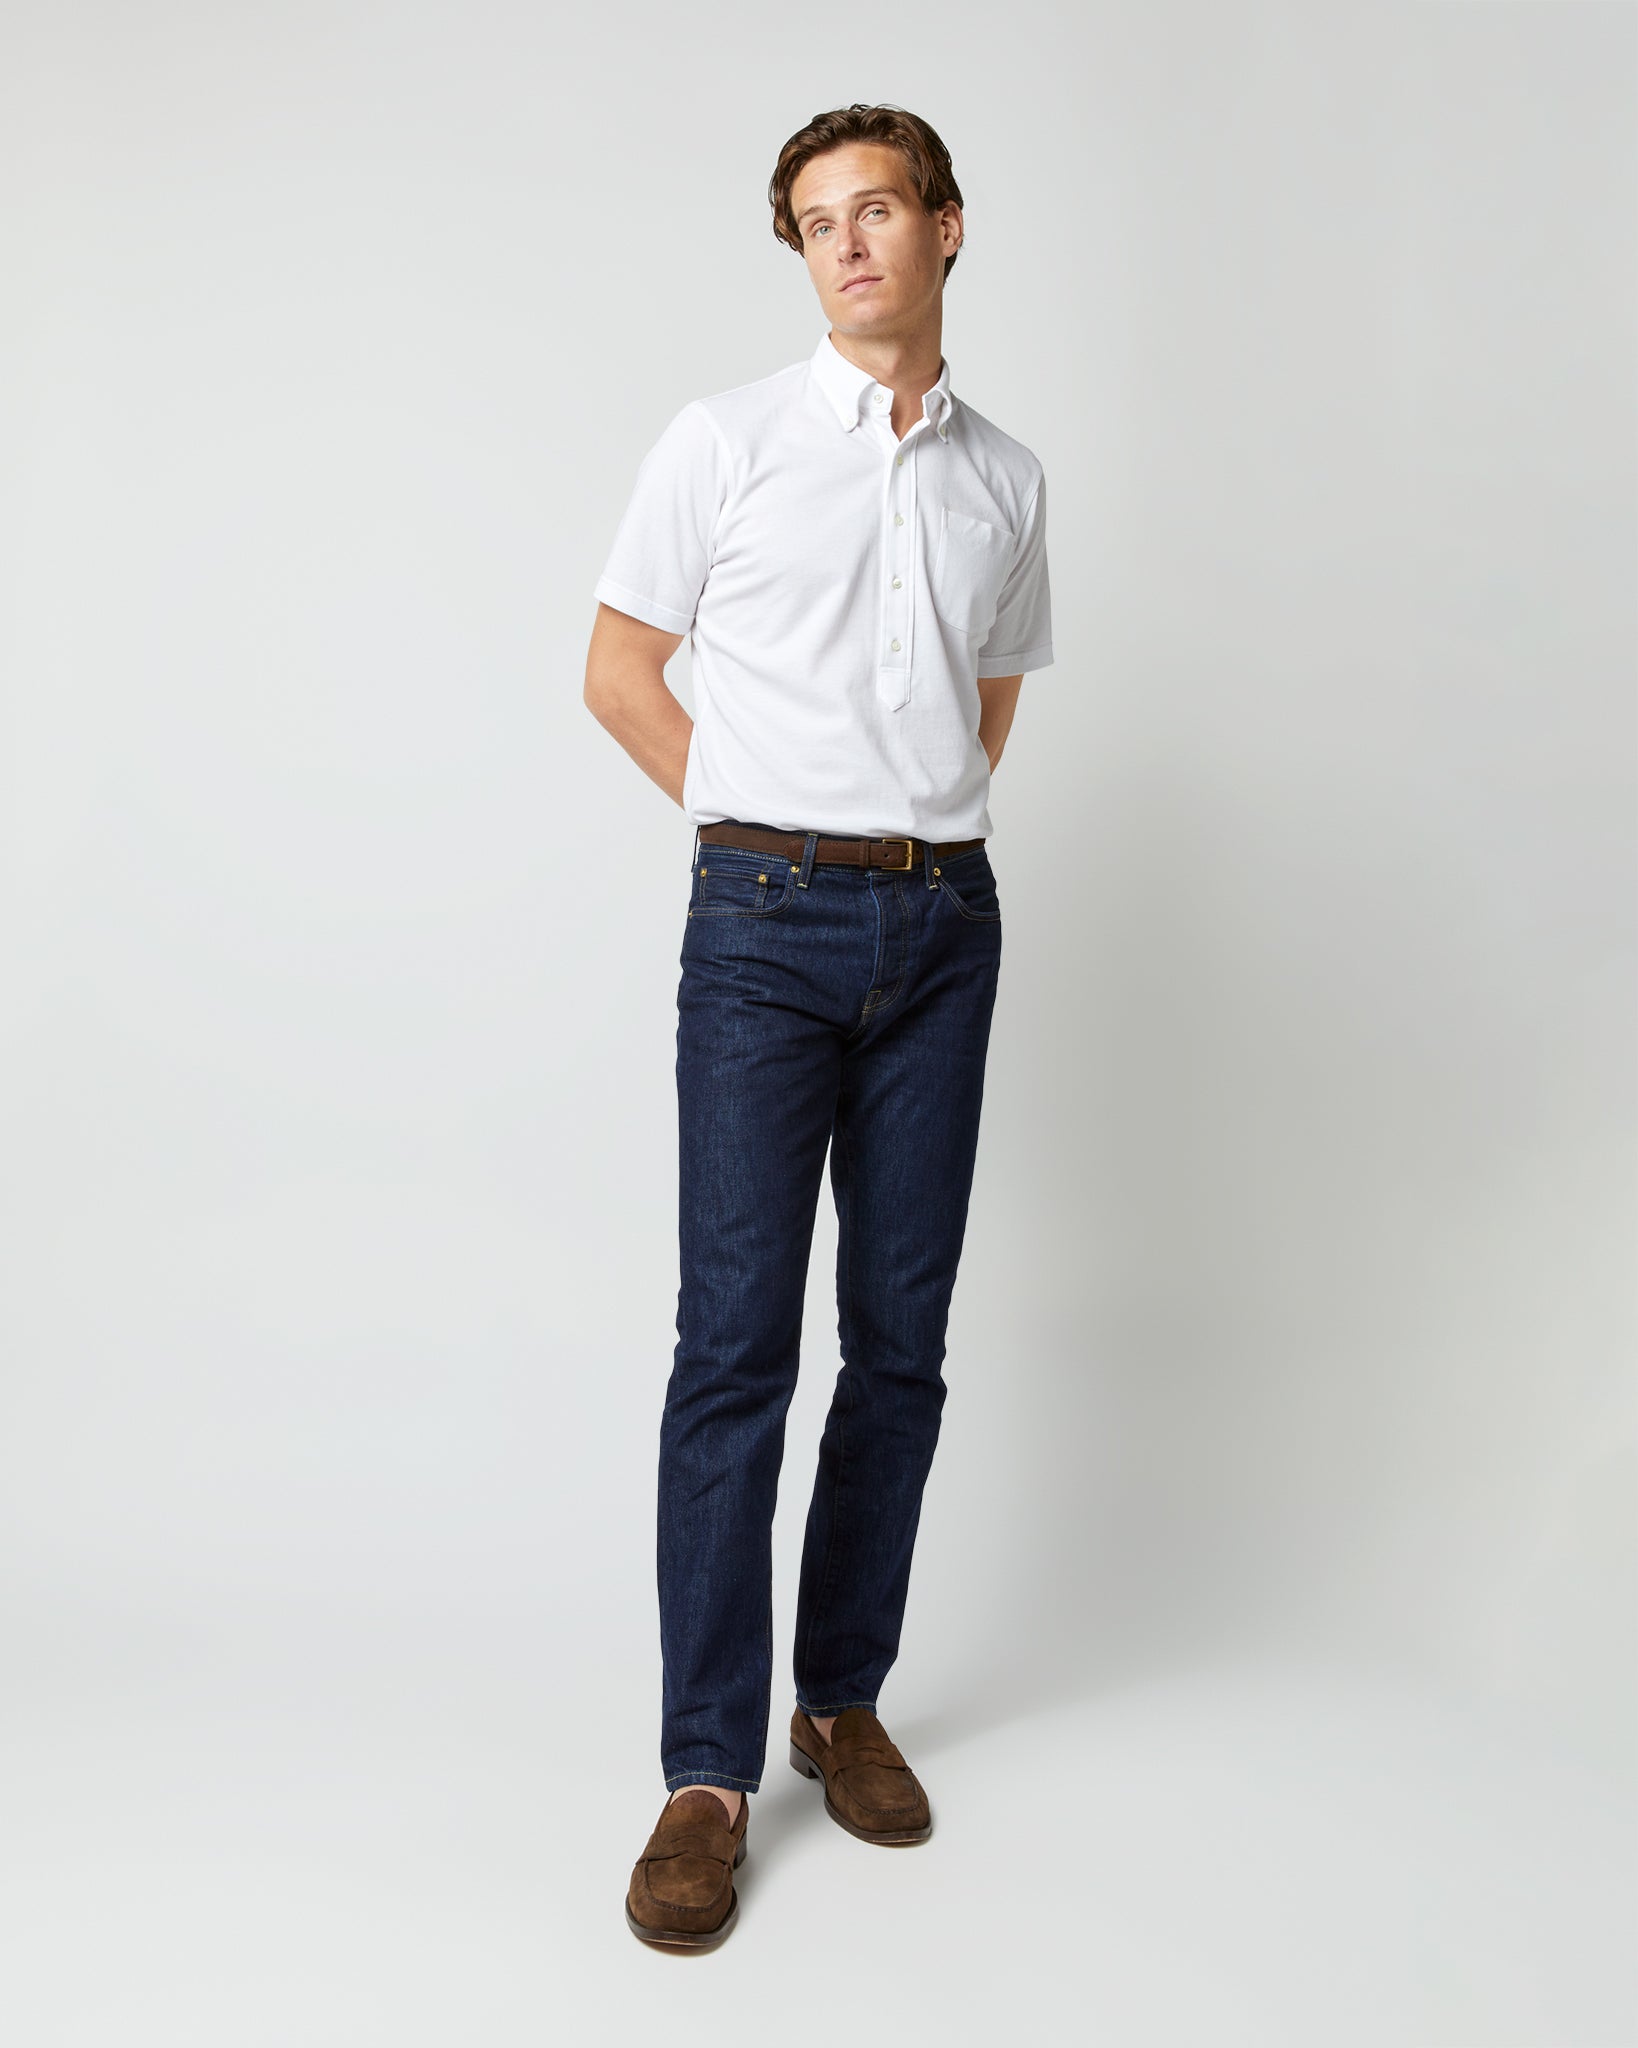 Short-Sleeved Knit Button-Down Popover Shirt in White Pima Pique